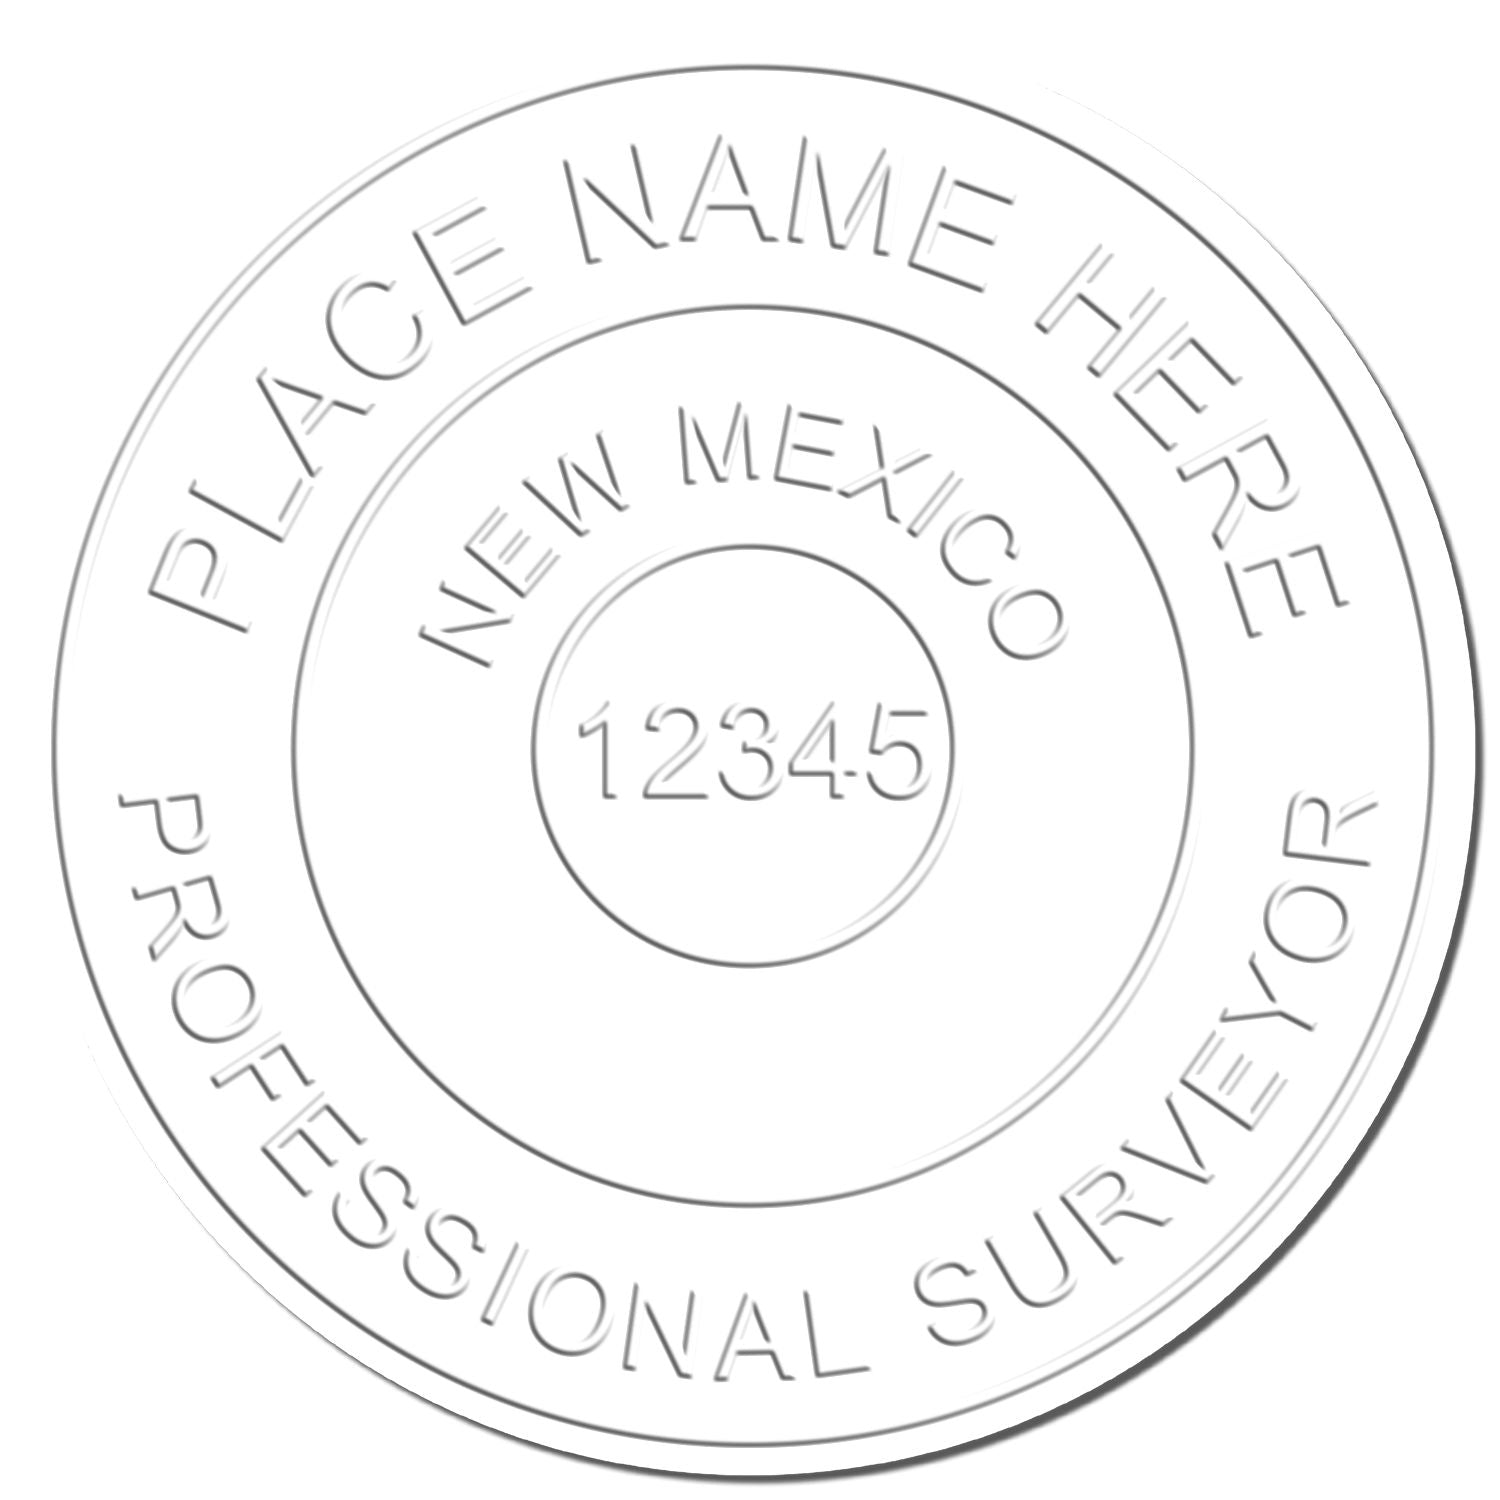 This paper is stamped with a sample imprint of the Heavy Duty Cast Iron New Mexico Land Surveyor Seal Embosser, signifying its quality and reliability.